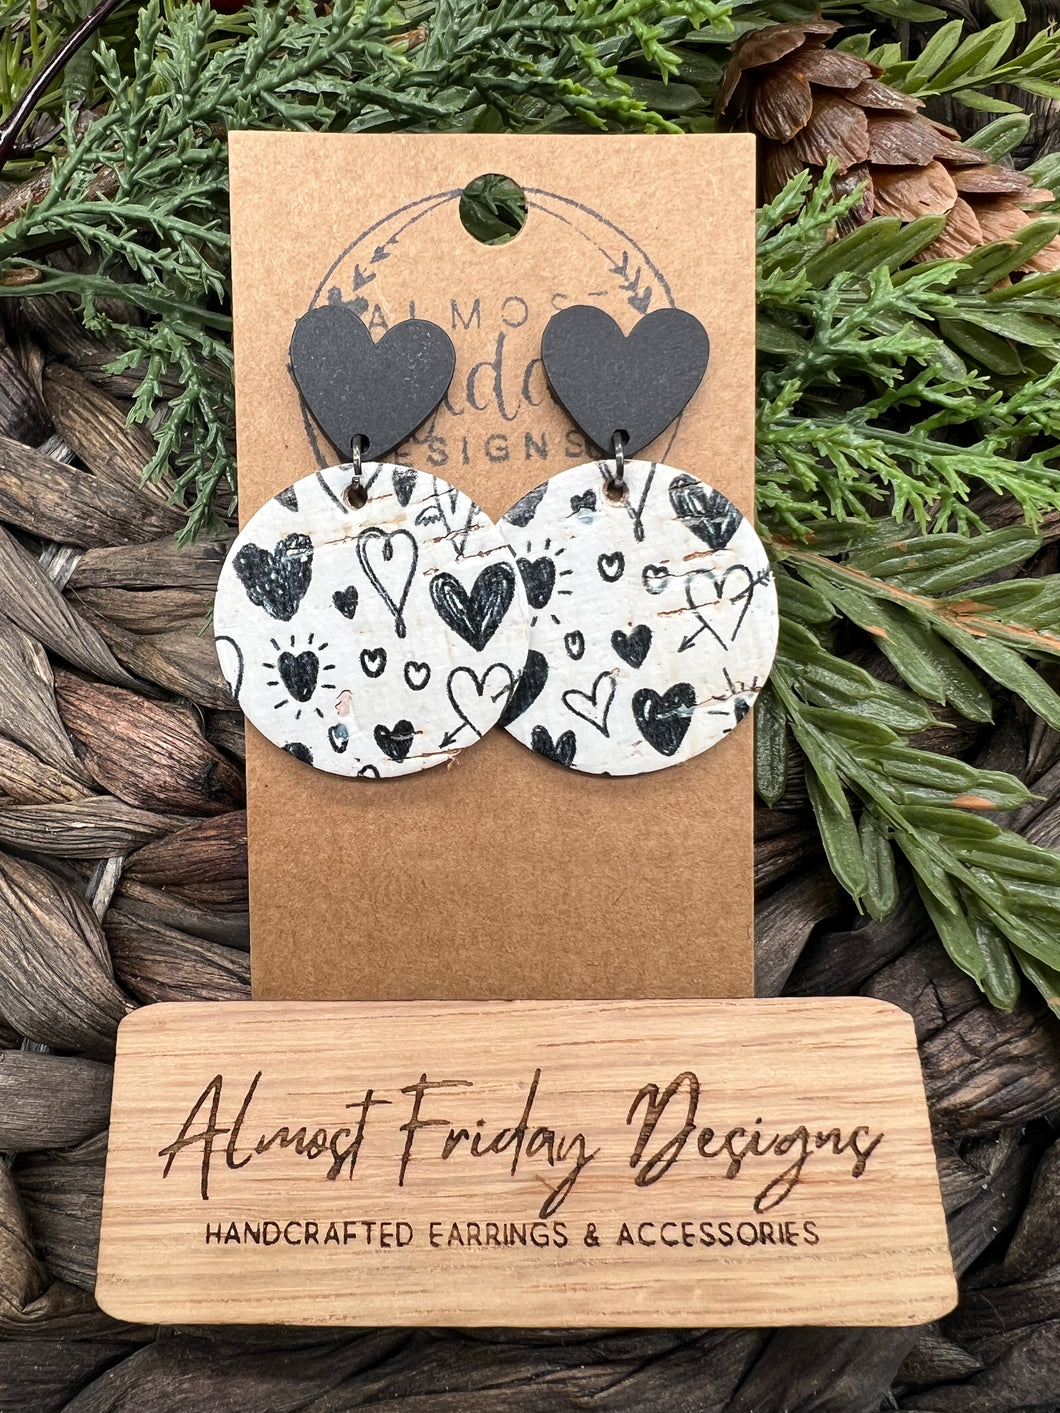 Genuine Leather Earrings - Round - Stud Post Earring - Black and White - Heart Earrings - Statement Earrings - Heart - Heart Connectors - Acrylic and Genuine Leather - Stud Posts